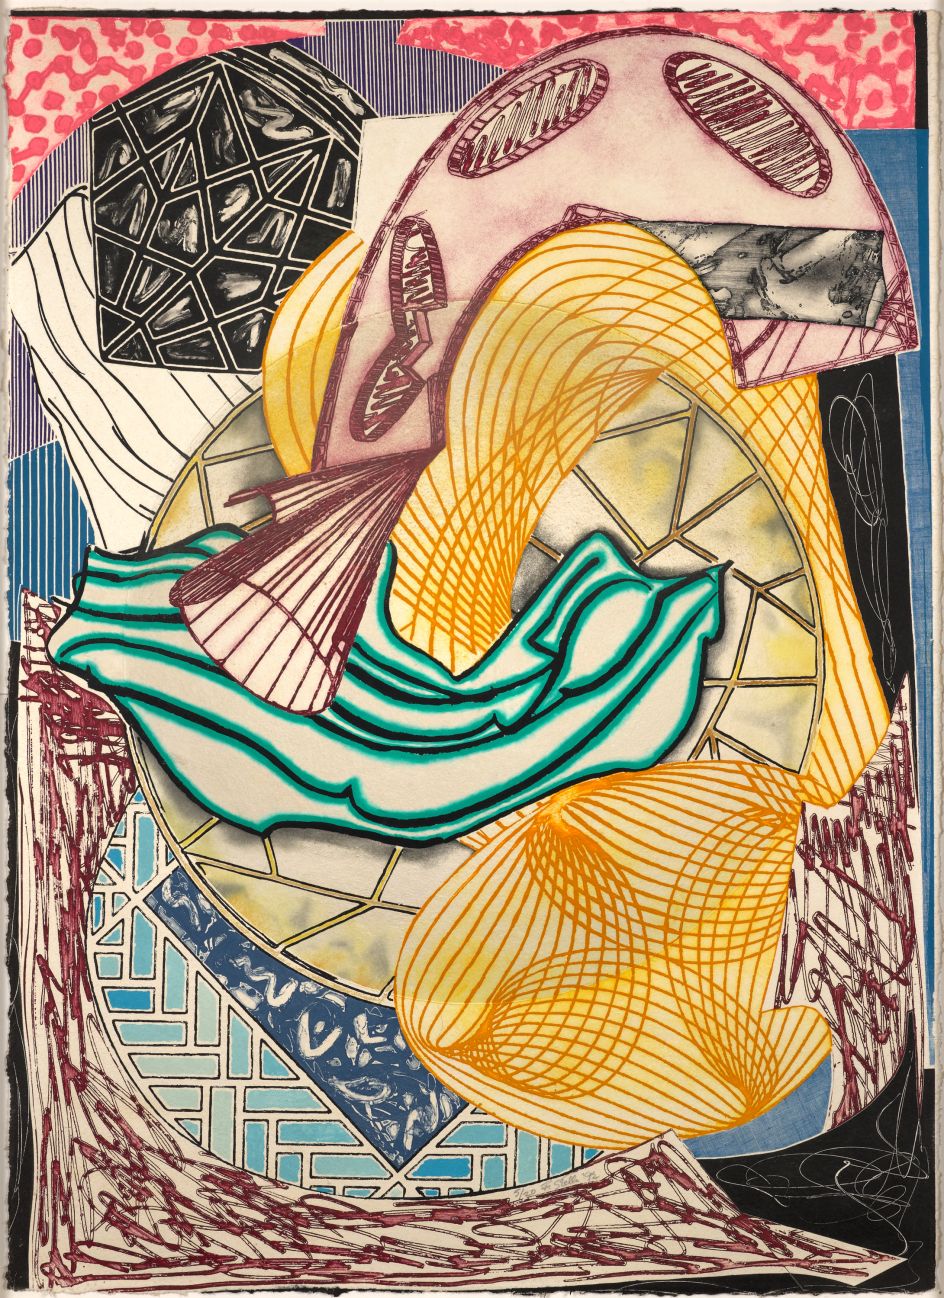 Frank Stella, American, born 1936. The Cabin. Ahab and Starbuck, 1991. Etching, aquatint, relief, and Carborundum on white, shaped TGL handmade paper, 185.4 × 134.6 × 15.2 cm. Collection of Preston H. Haskell, Class of 1960 / © 2017 Frank Stella / Artists Rights Society (ARS), New York